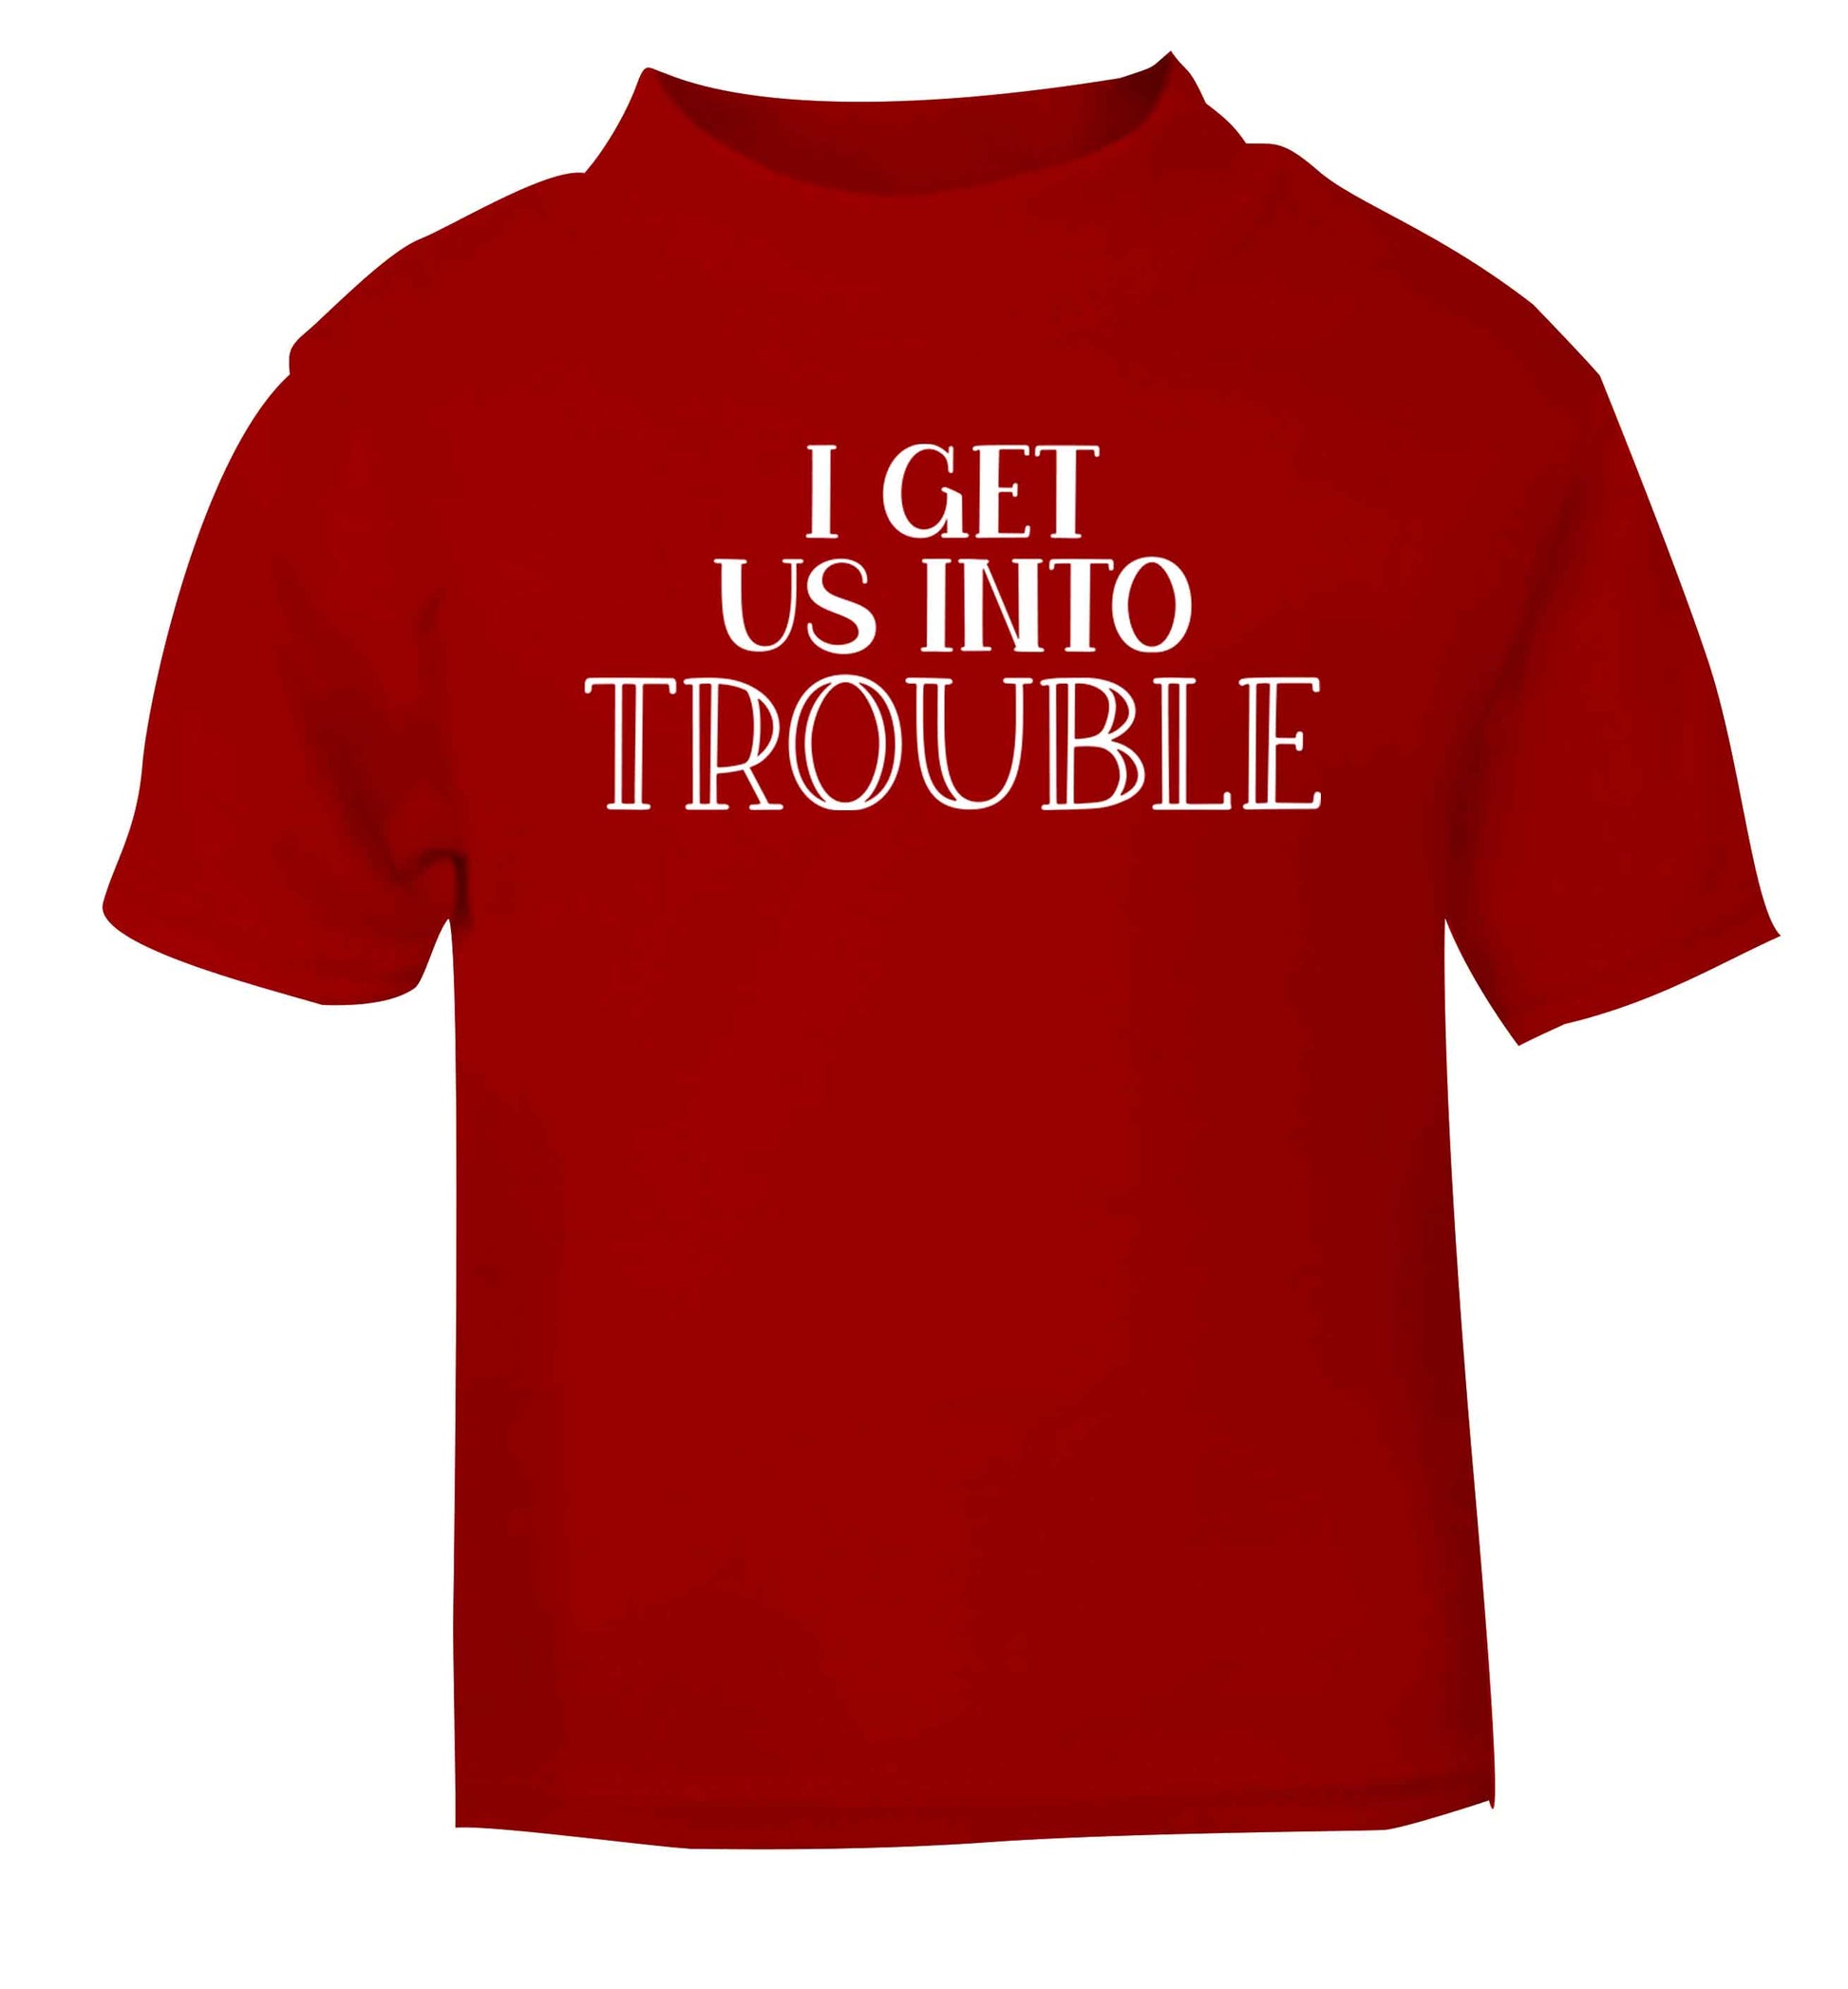 I get us into trouble red baby toddler Tshirt 2 Years